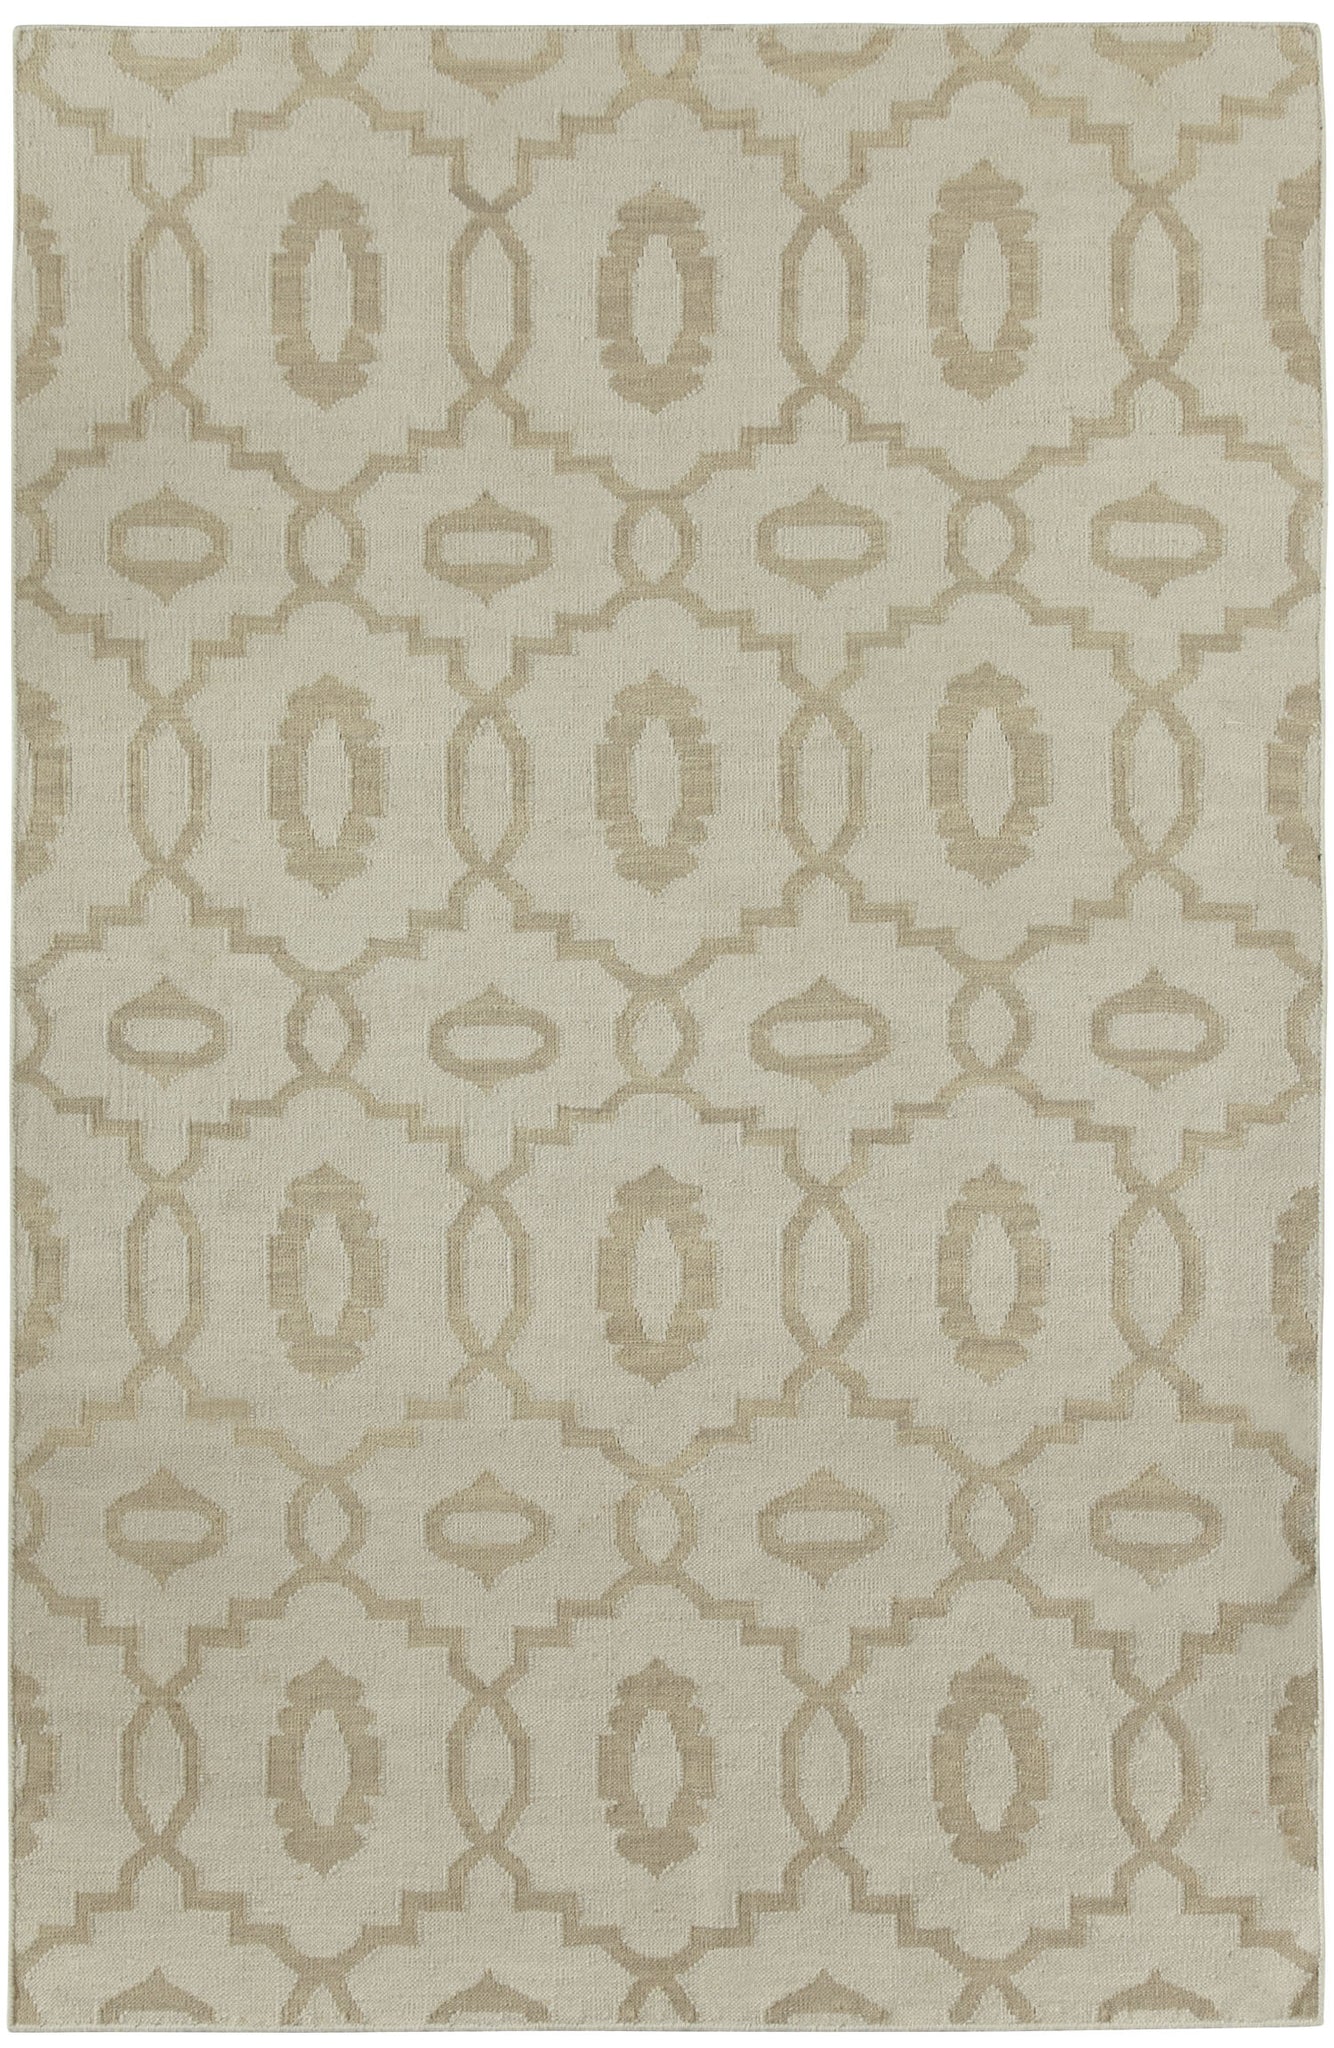 Capel Anchor 3628 Natural 675 Area Rug by Genevieve Gorder main image